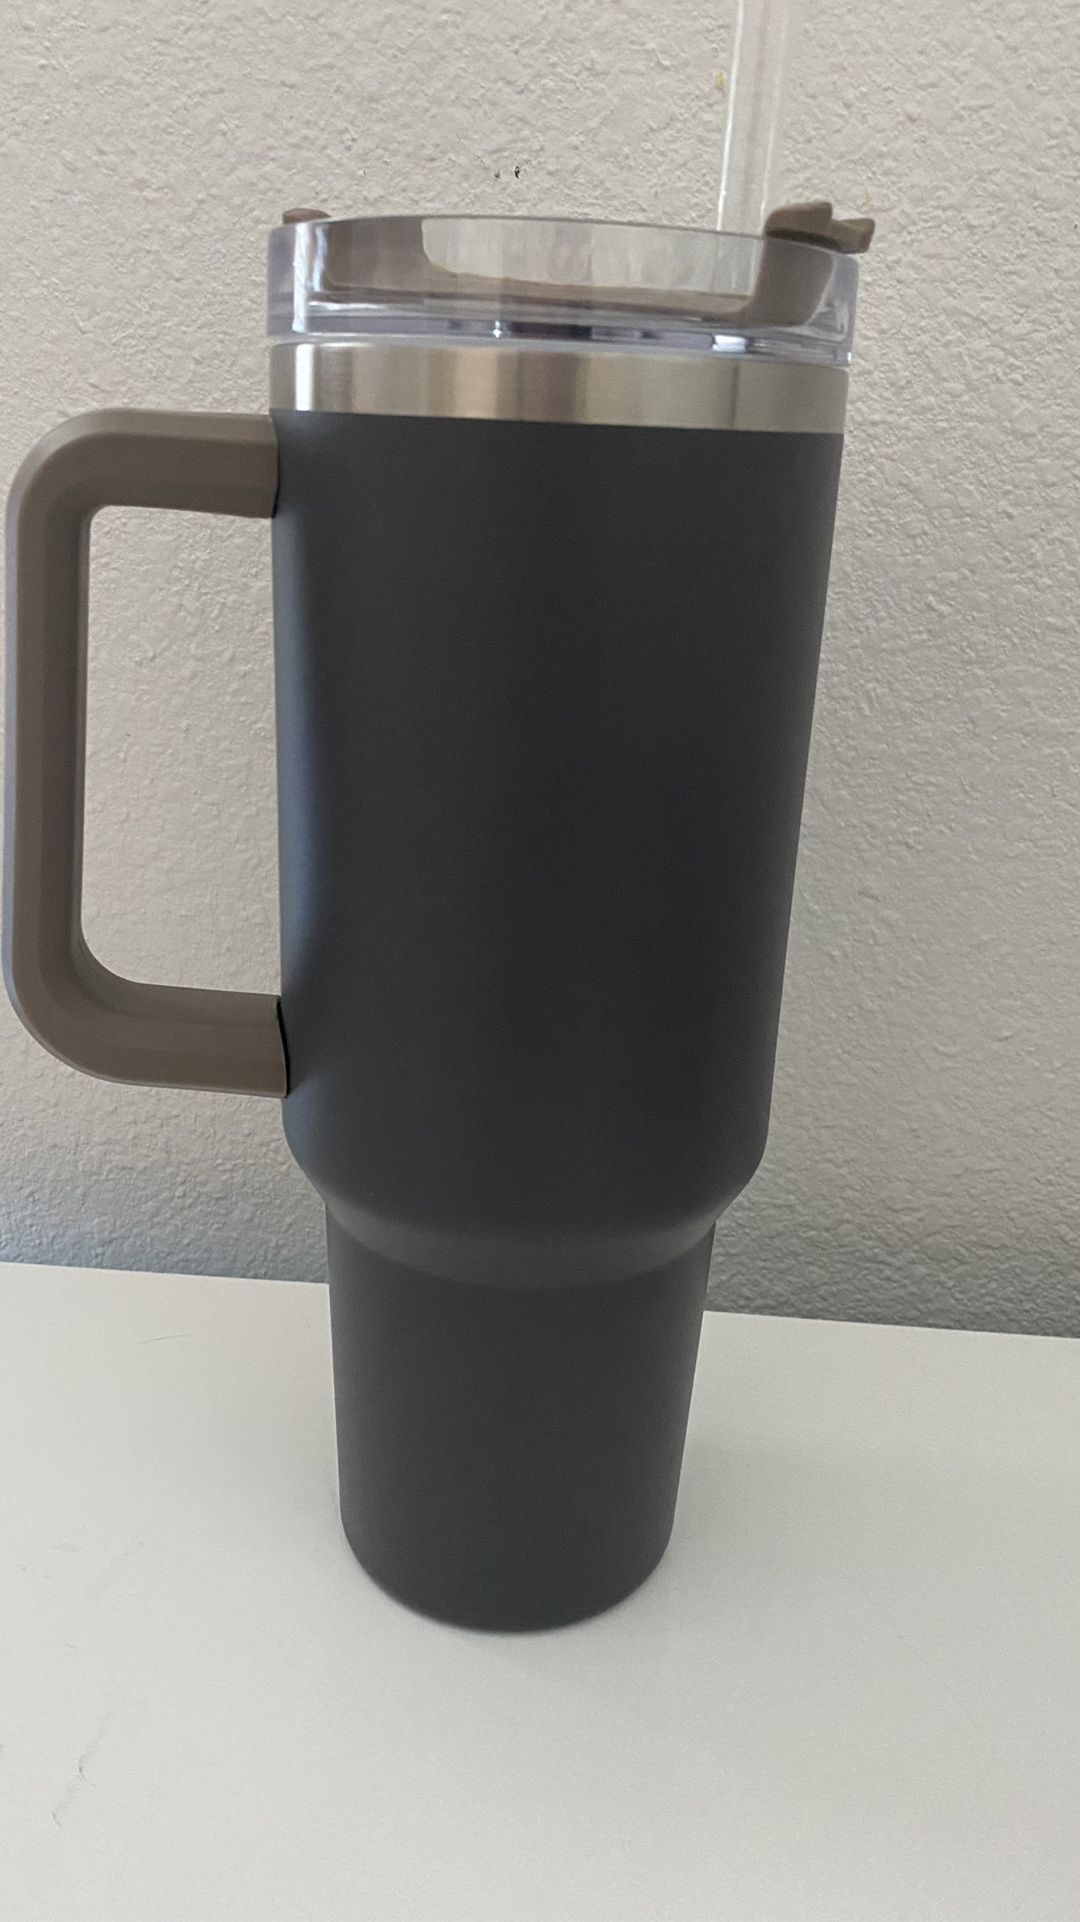 STANLEY Adventure Quencher Travel Tumbler 40 oz - Purple for Sale in Los  Angeles, CA - OfferUp